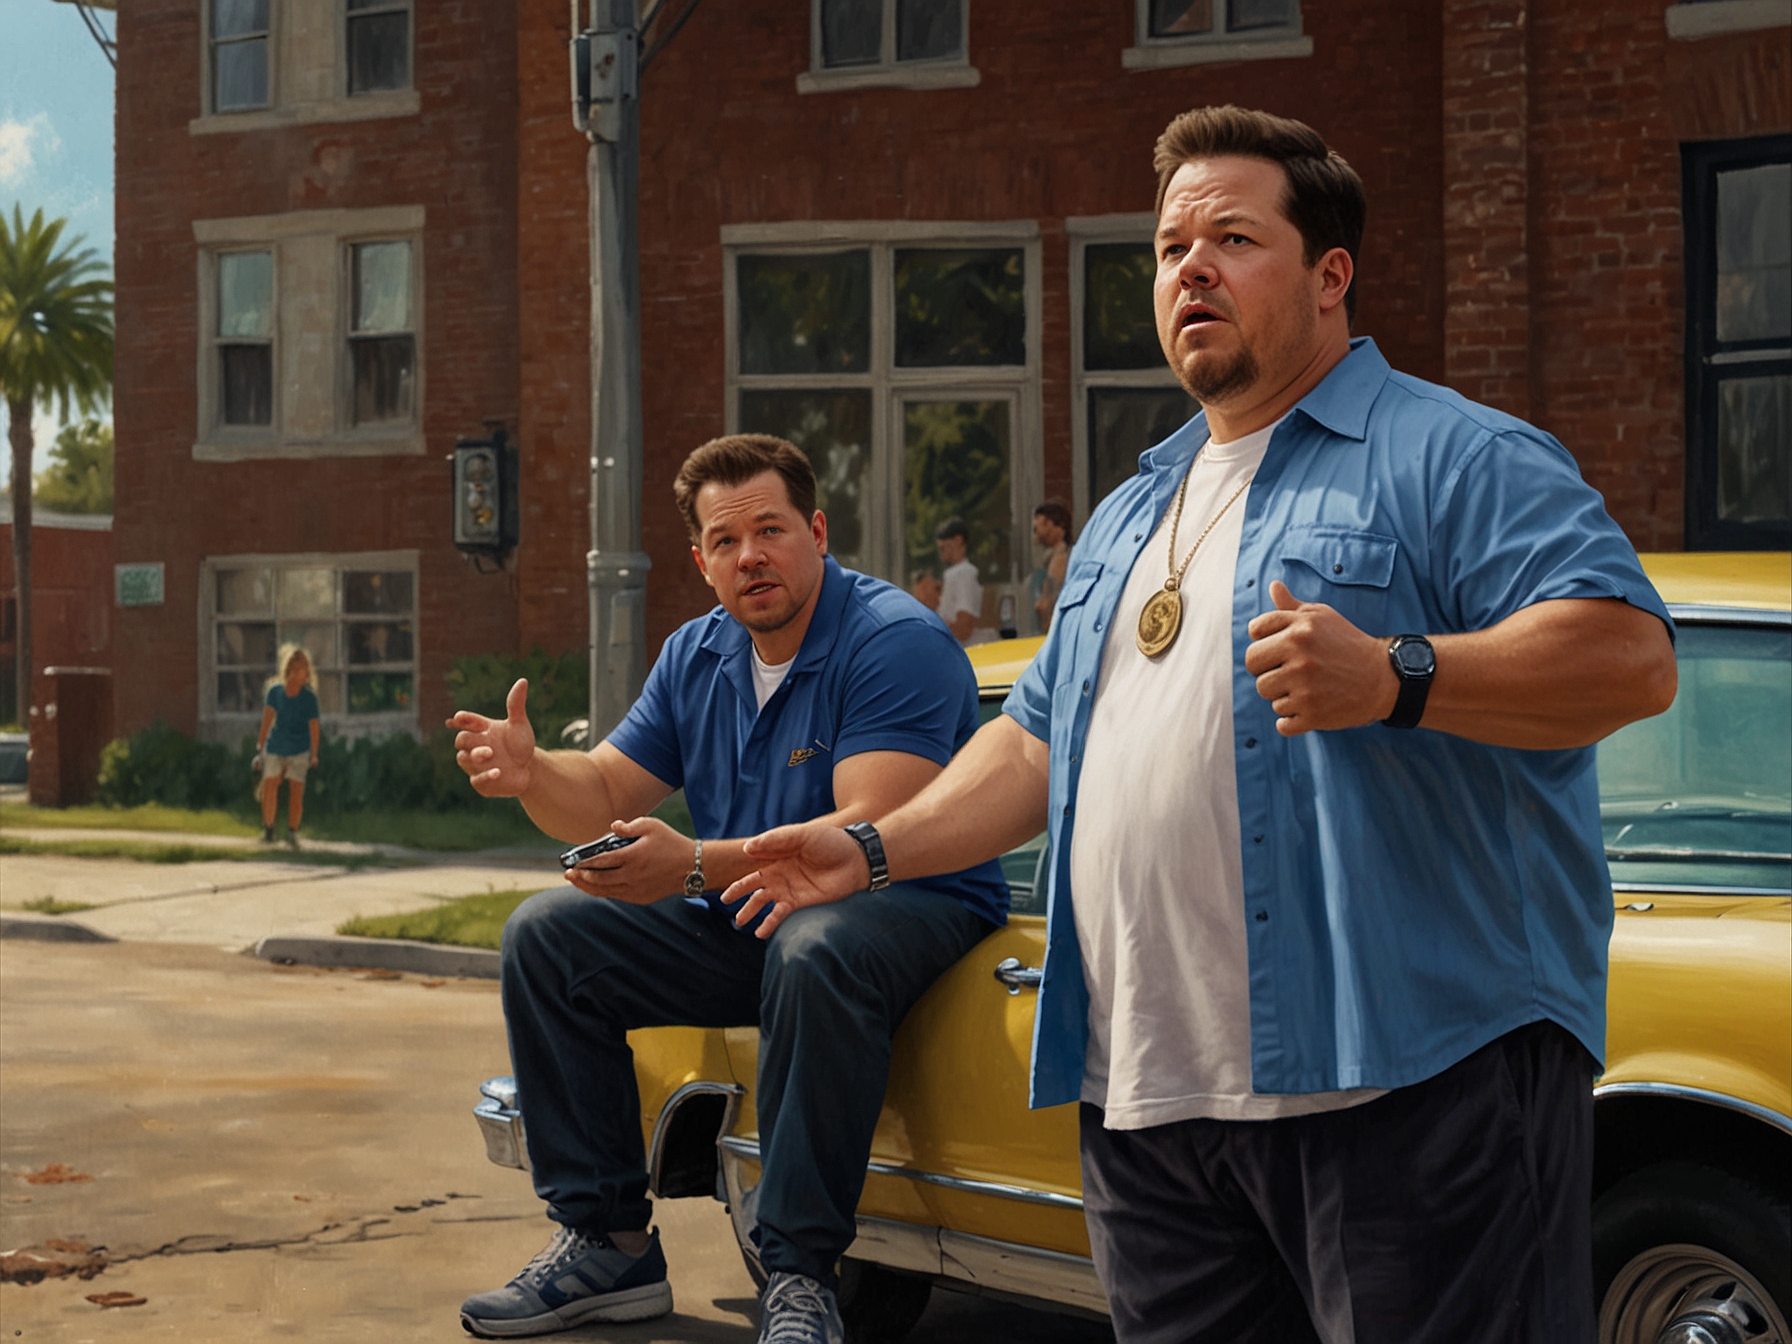 Mark Wahlberg and Paul Walter Hauser in character on set, showcasing the dynamic duo involved in a humorous and action-packed scene from 'Balls Up'. The backdrop hints at unexpected adventures and challenges.